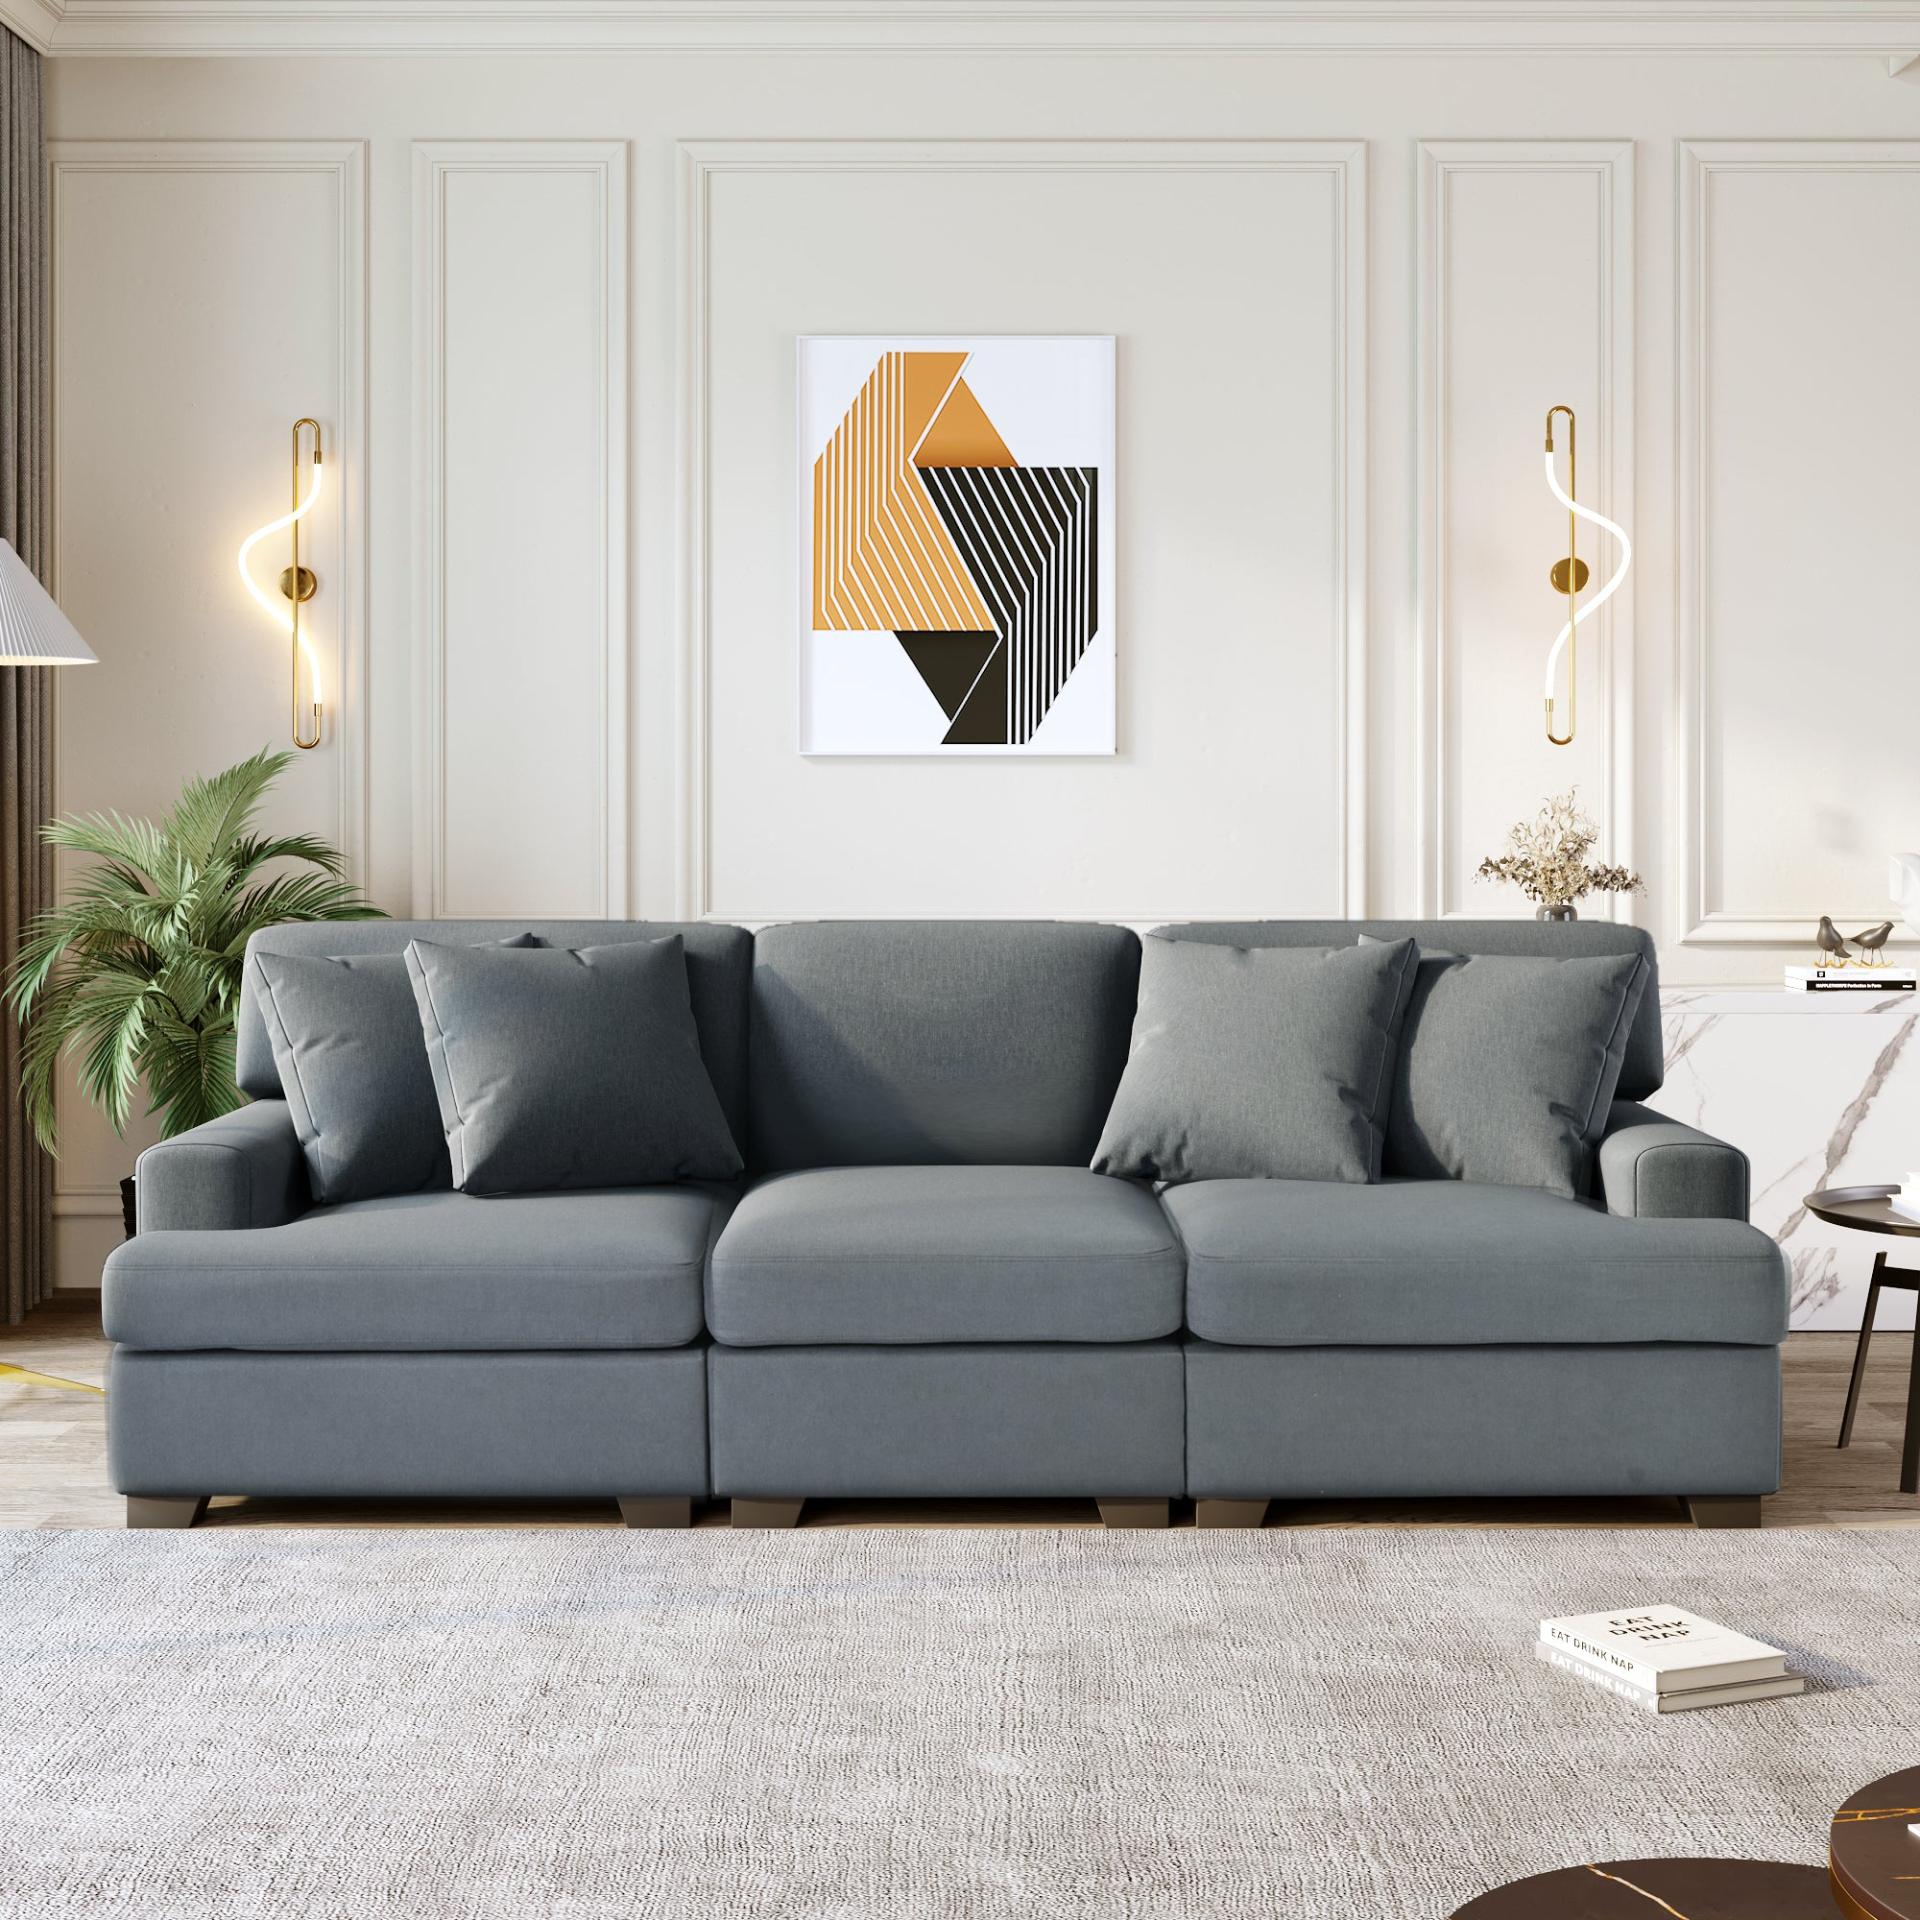  Cozy Comfort: Azilure's Inviting 3-Piece Sofa Set with Removable Ottomans